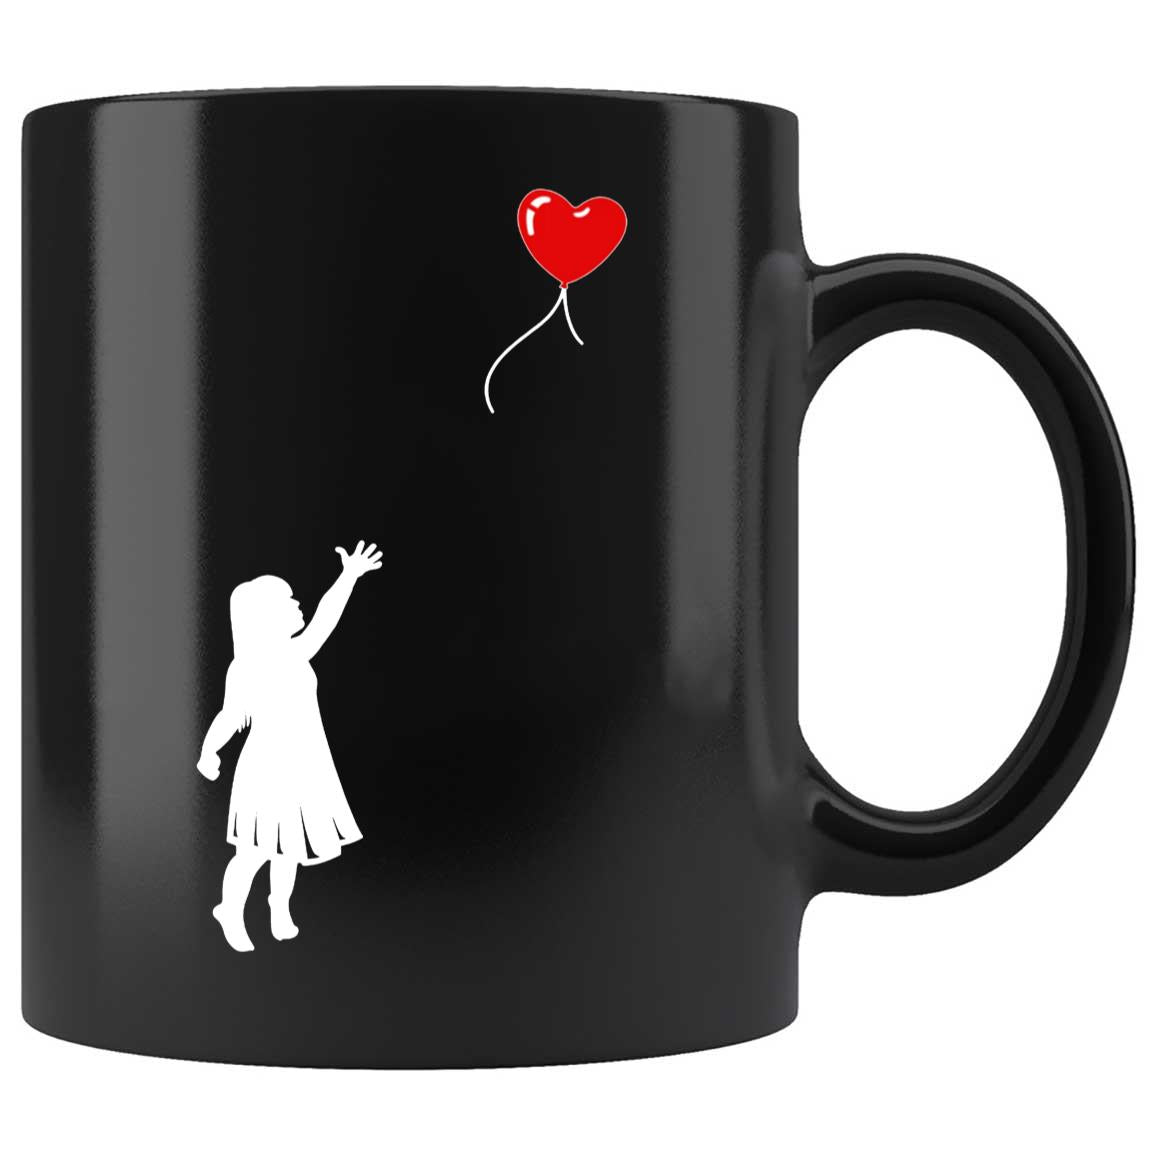 Skitongifts Coffee Mug Funny Ceramic Novelty There Is Always Hope (Girl With Red Balloon) EO9opei